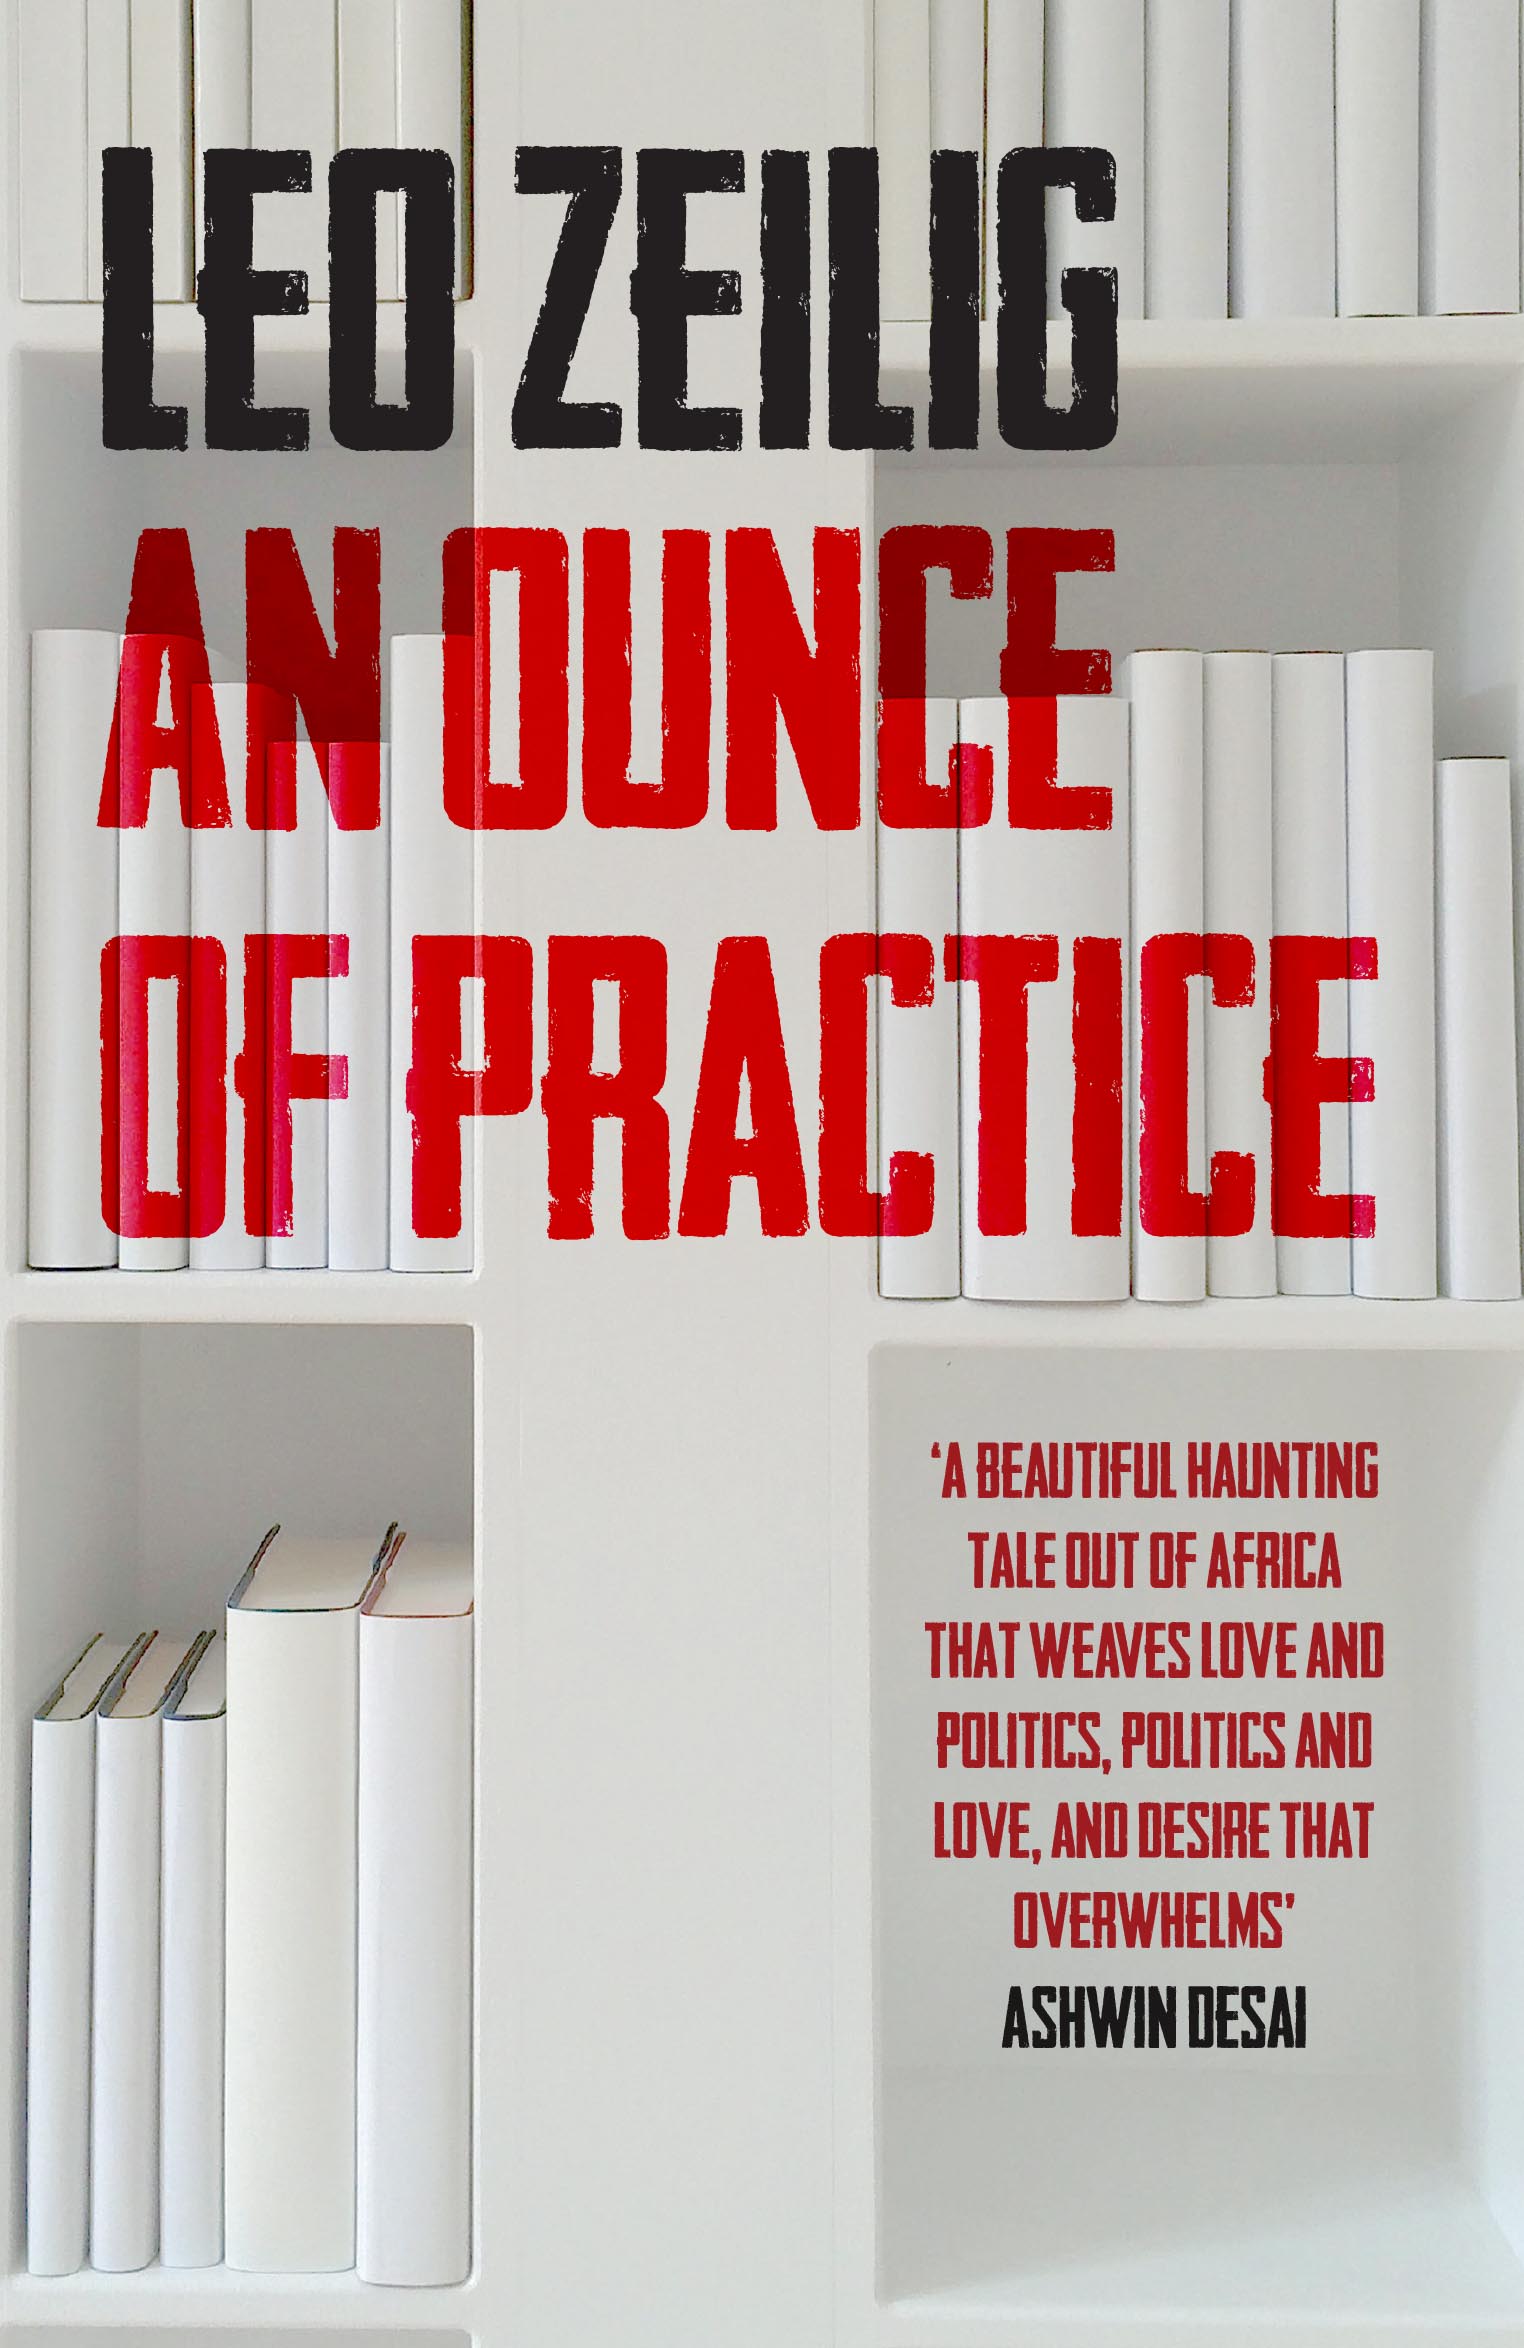 NO HONOURABLE GODDAMN STEREOTYPES HERE: ‘An Ounce of Practice’ by Leo Zeilig